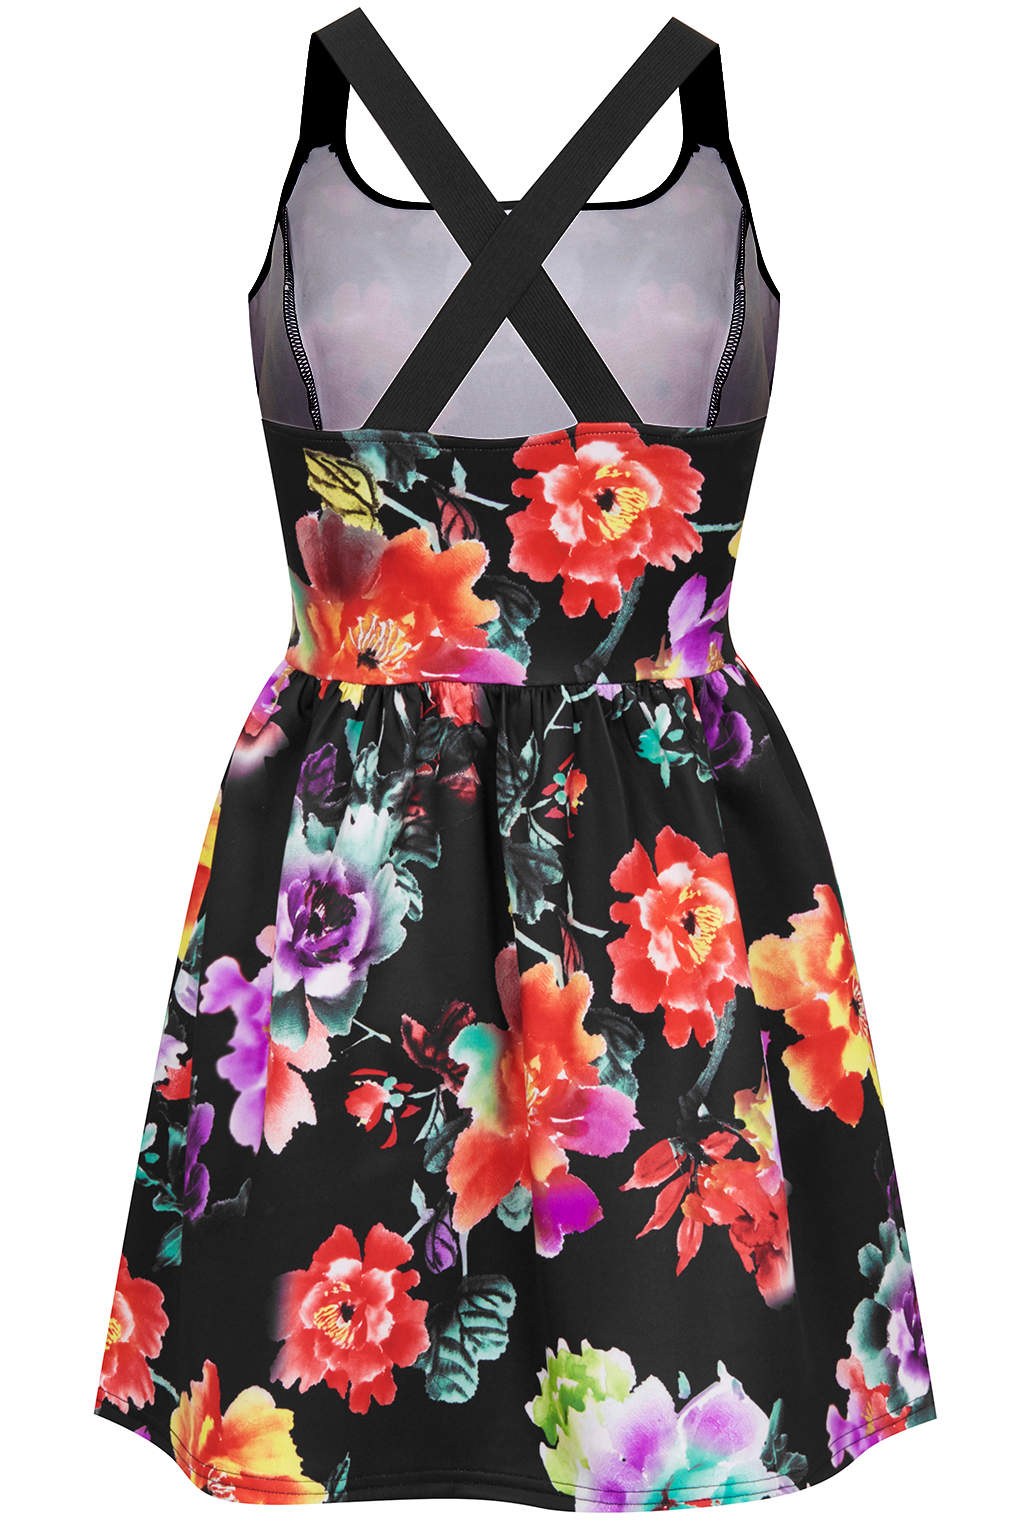 Lyst - Topshop Floral Skater Dress with Cross Over Straps